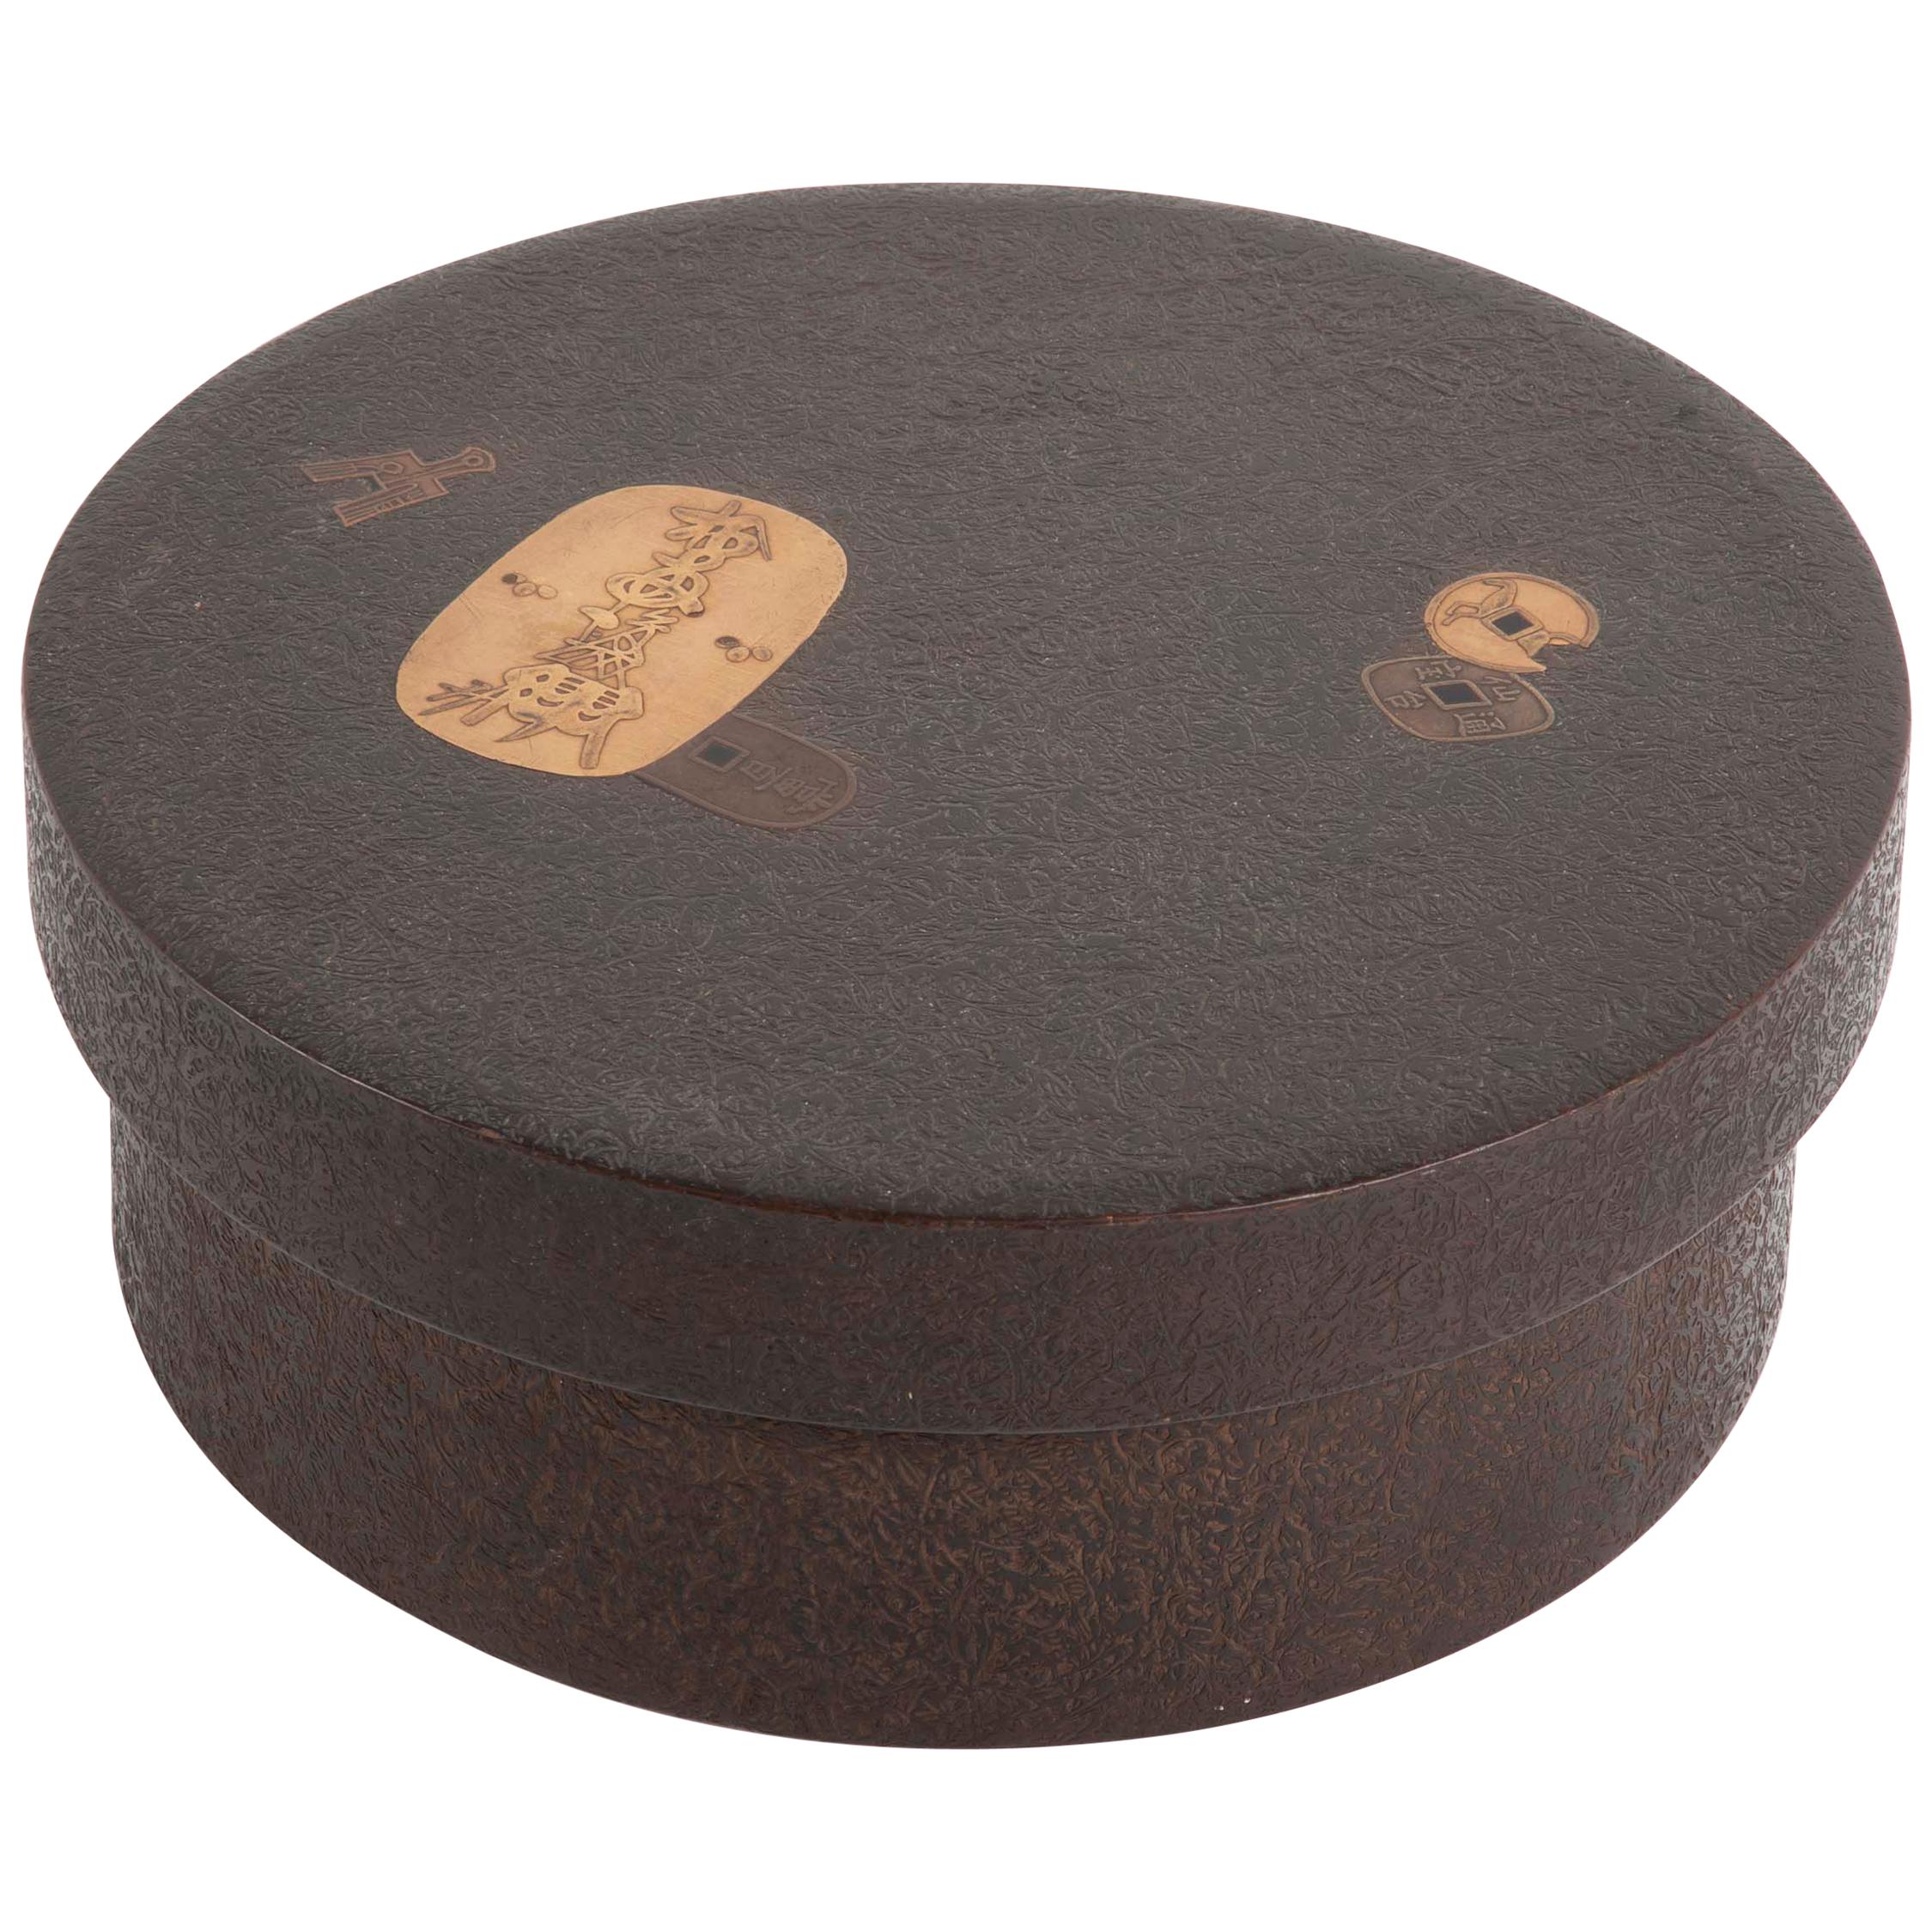 Round Japanese Covered Lacquer Box with Coin Motif in Gold